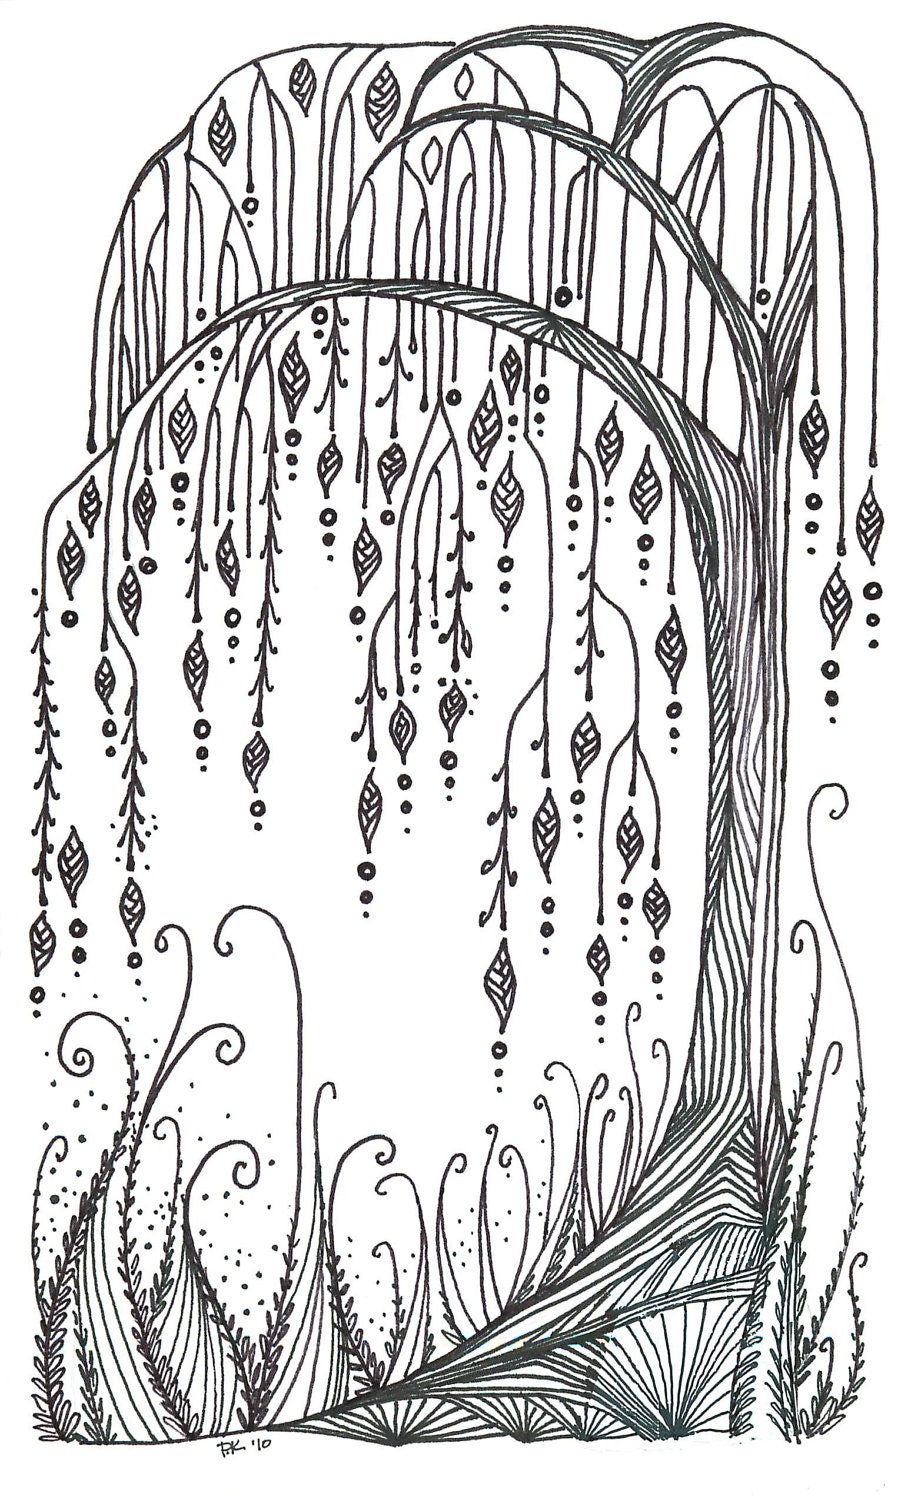 Willow Tree 8x10 print by PiqueStudios on Etsy